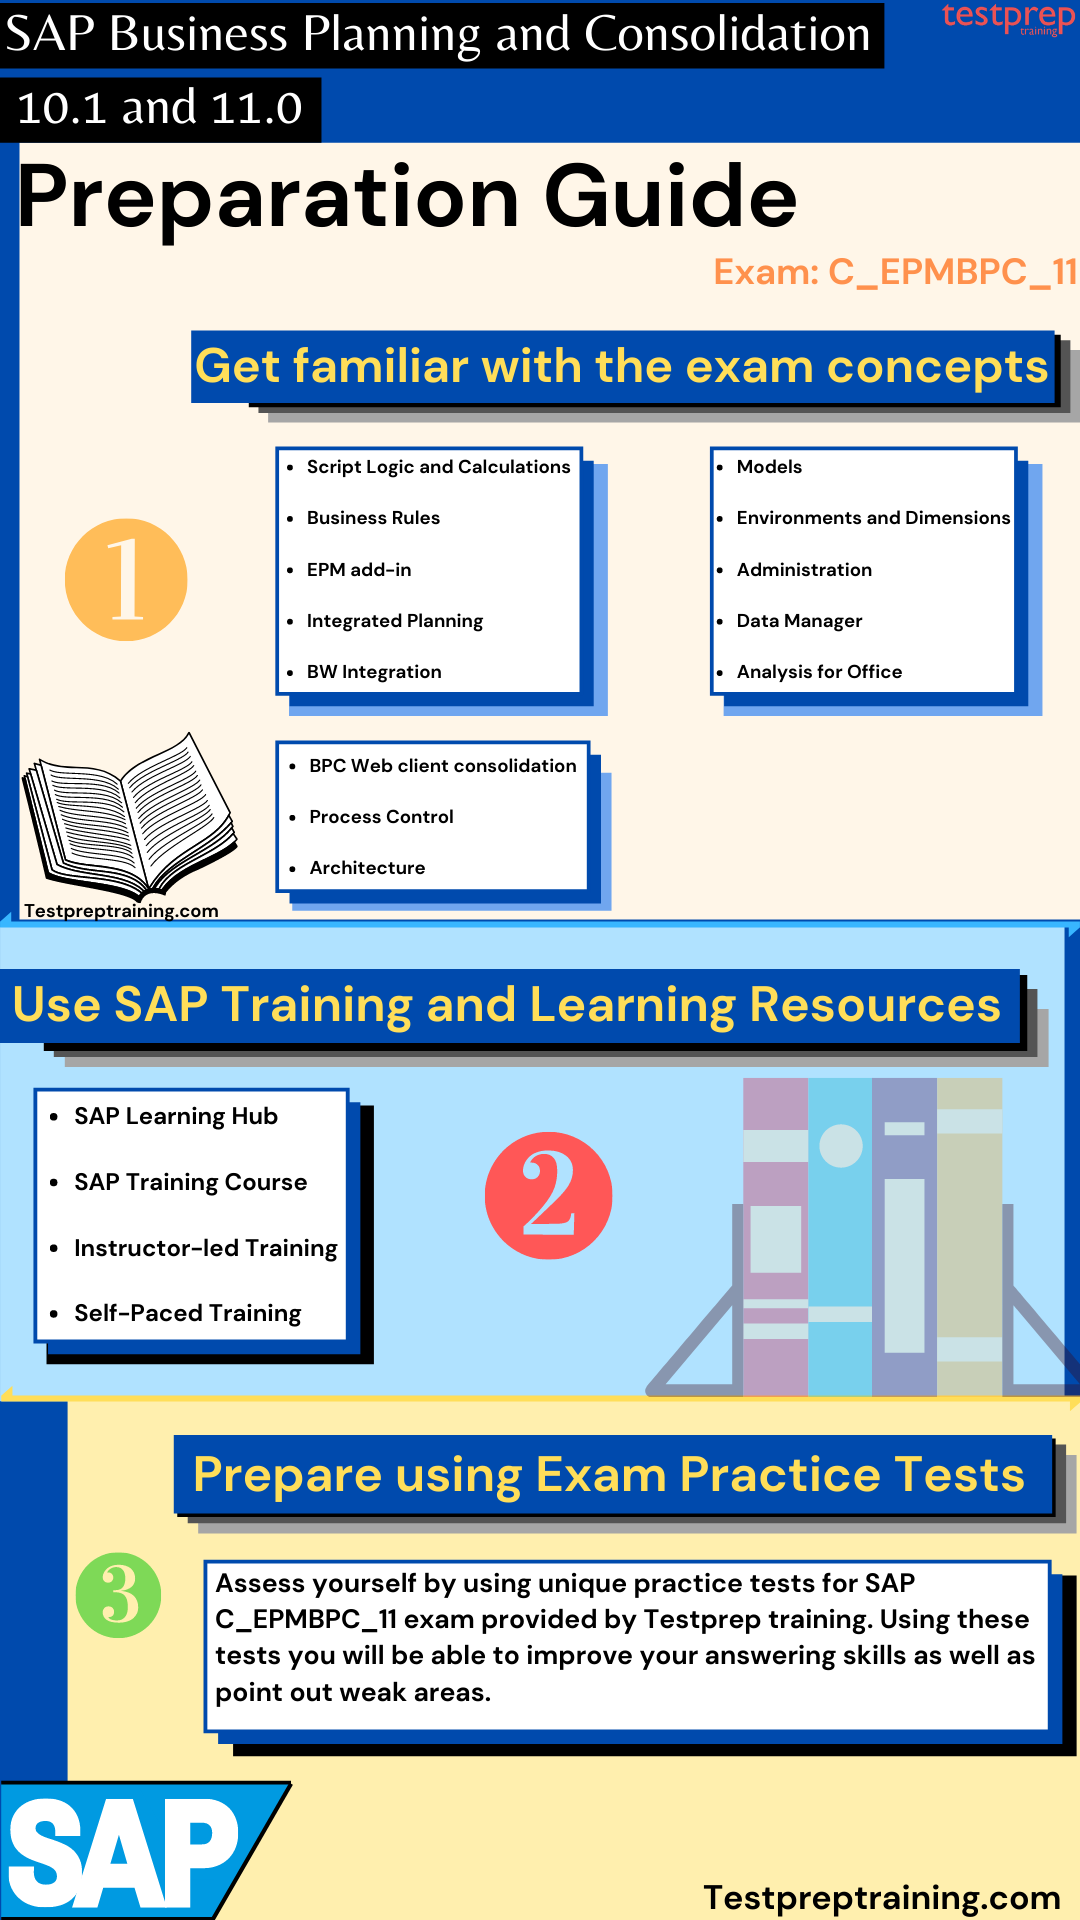 SAP Business Planning and Consolidation 10.1 and 11.0 C_EPMBPC_11 Exam study guide